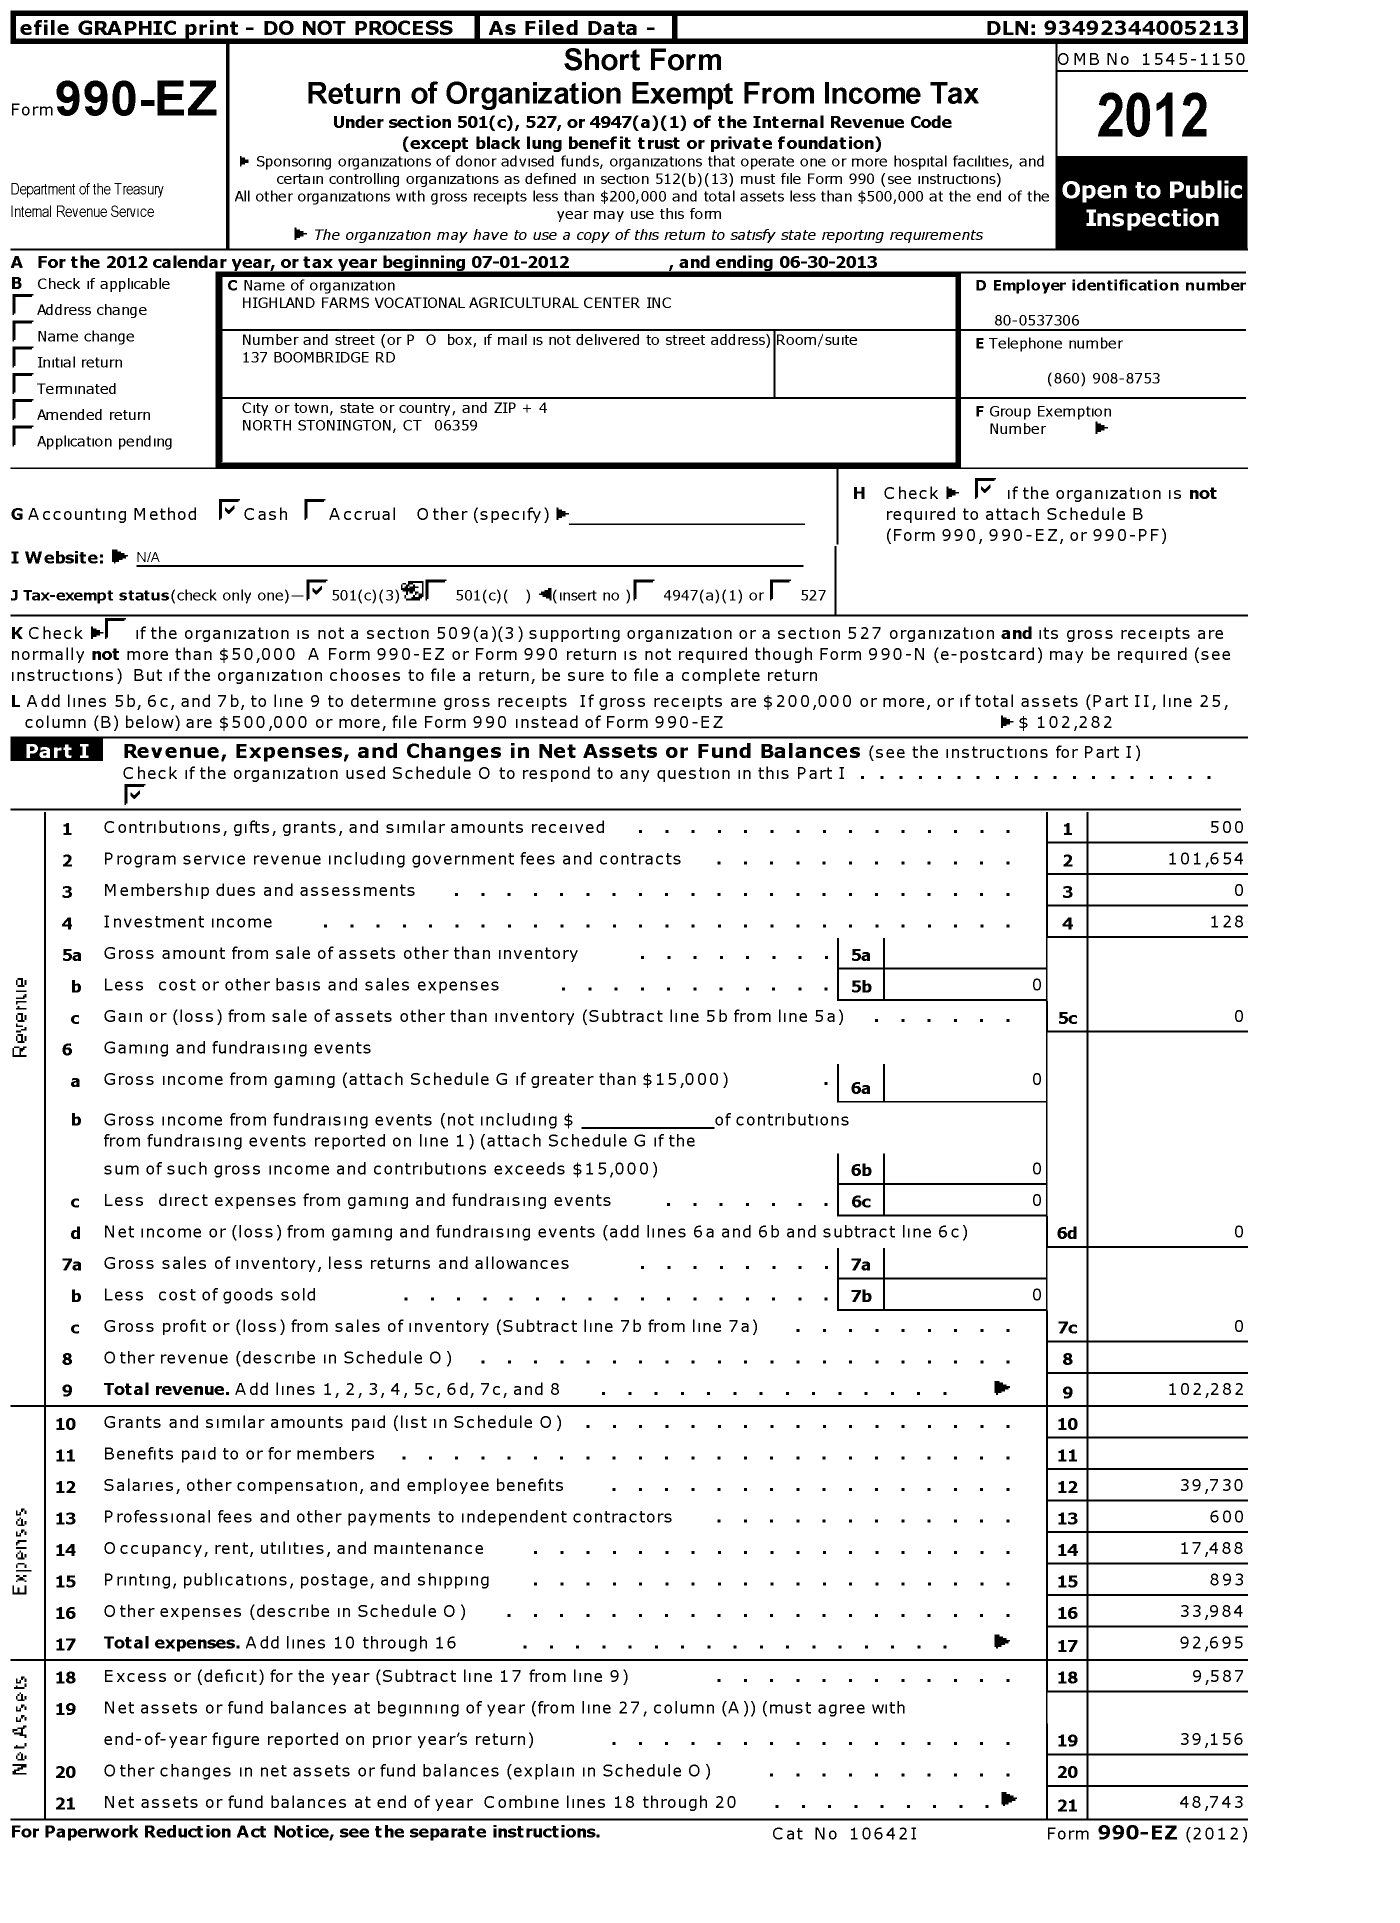 Image of first page of 2012 Form 990EZ for Highland Farms Vocational Agricultrural Center